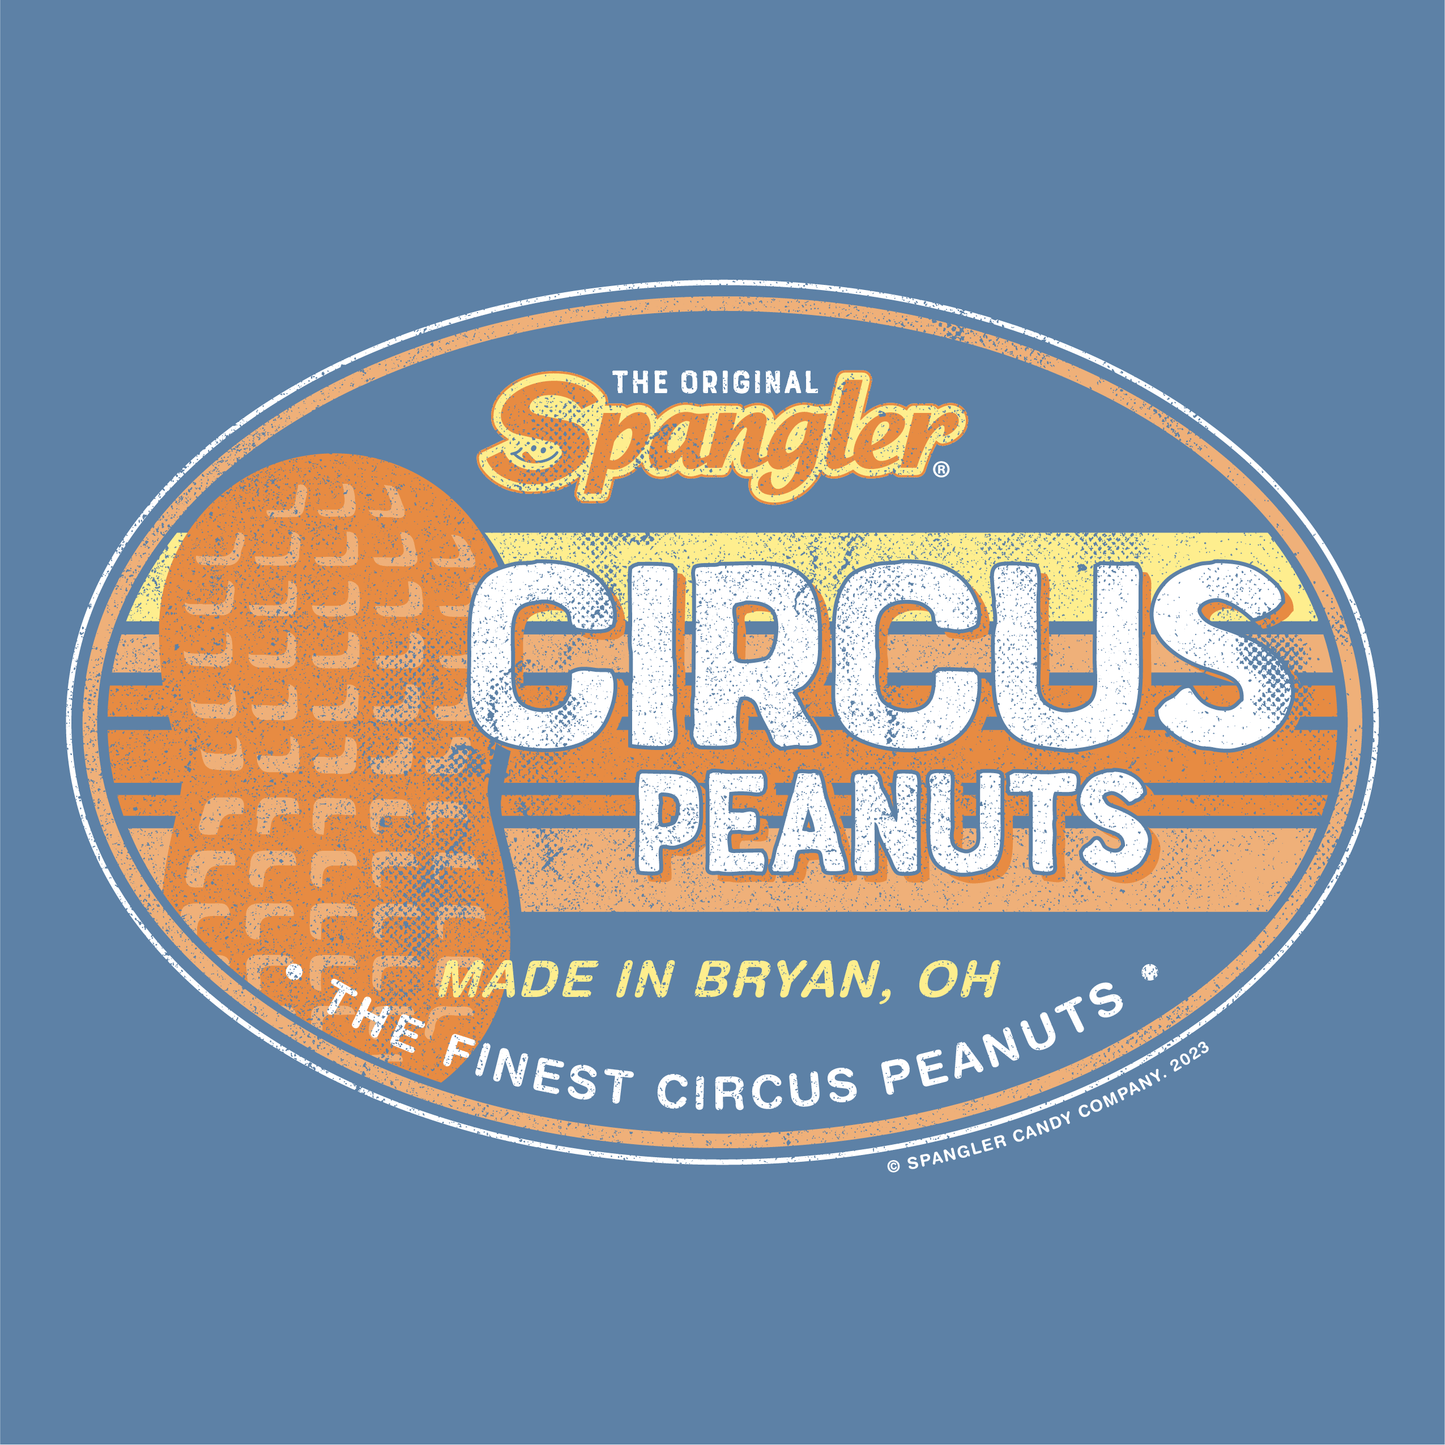 The Finest Circus Peanuts Since 1924 Retro Tee